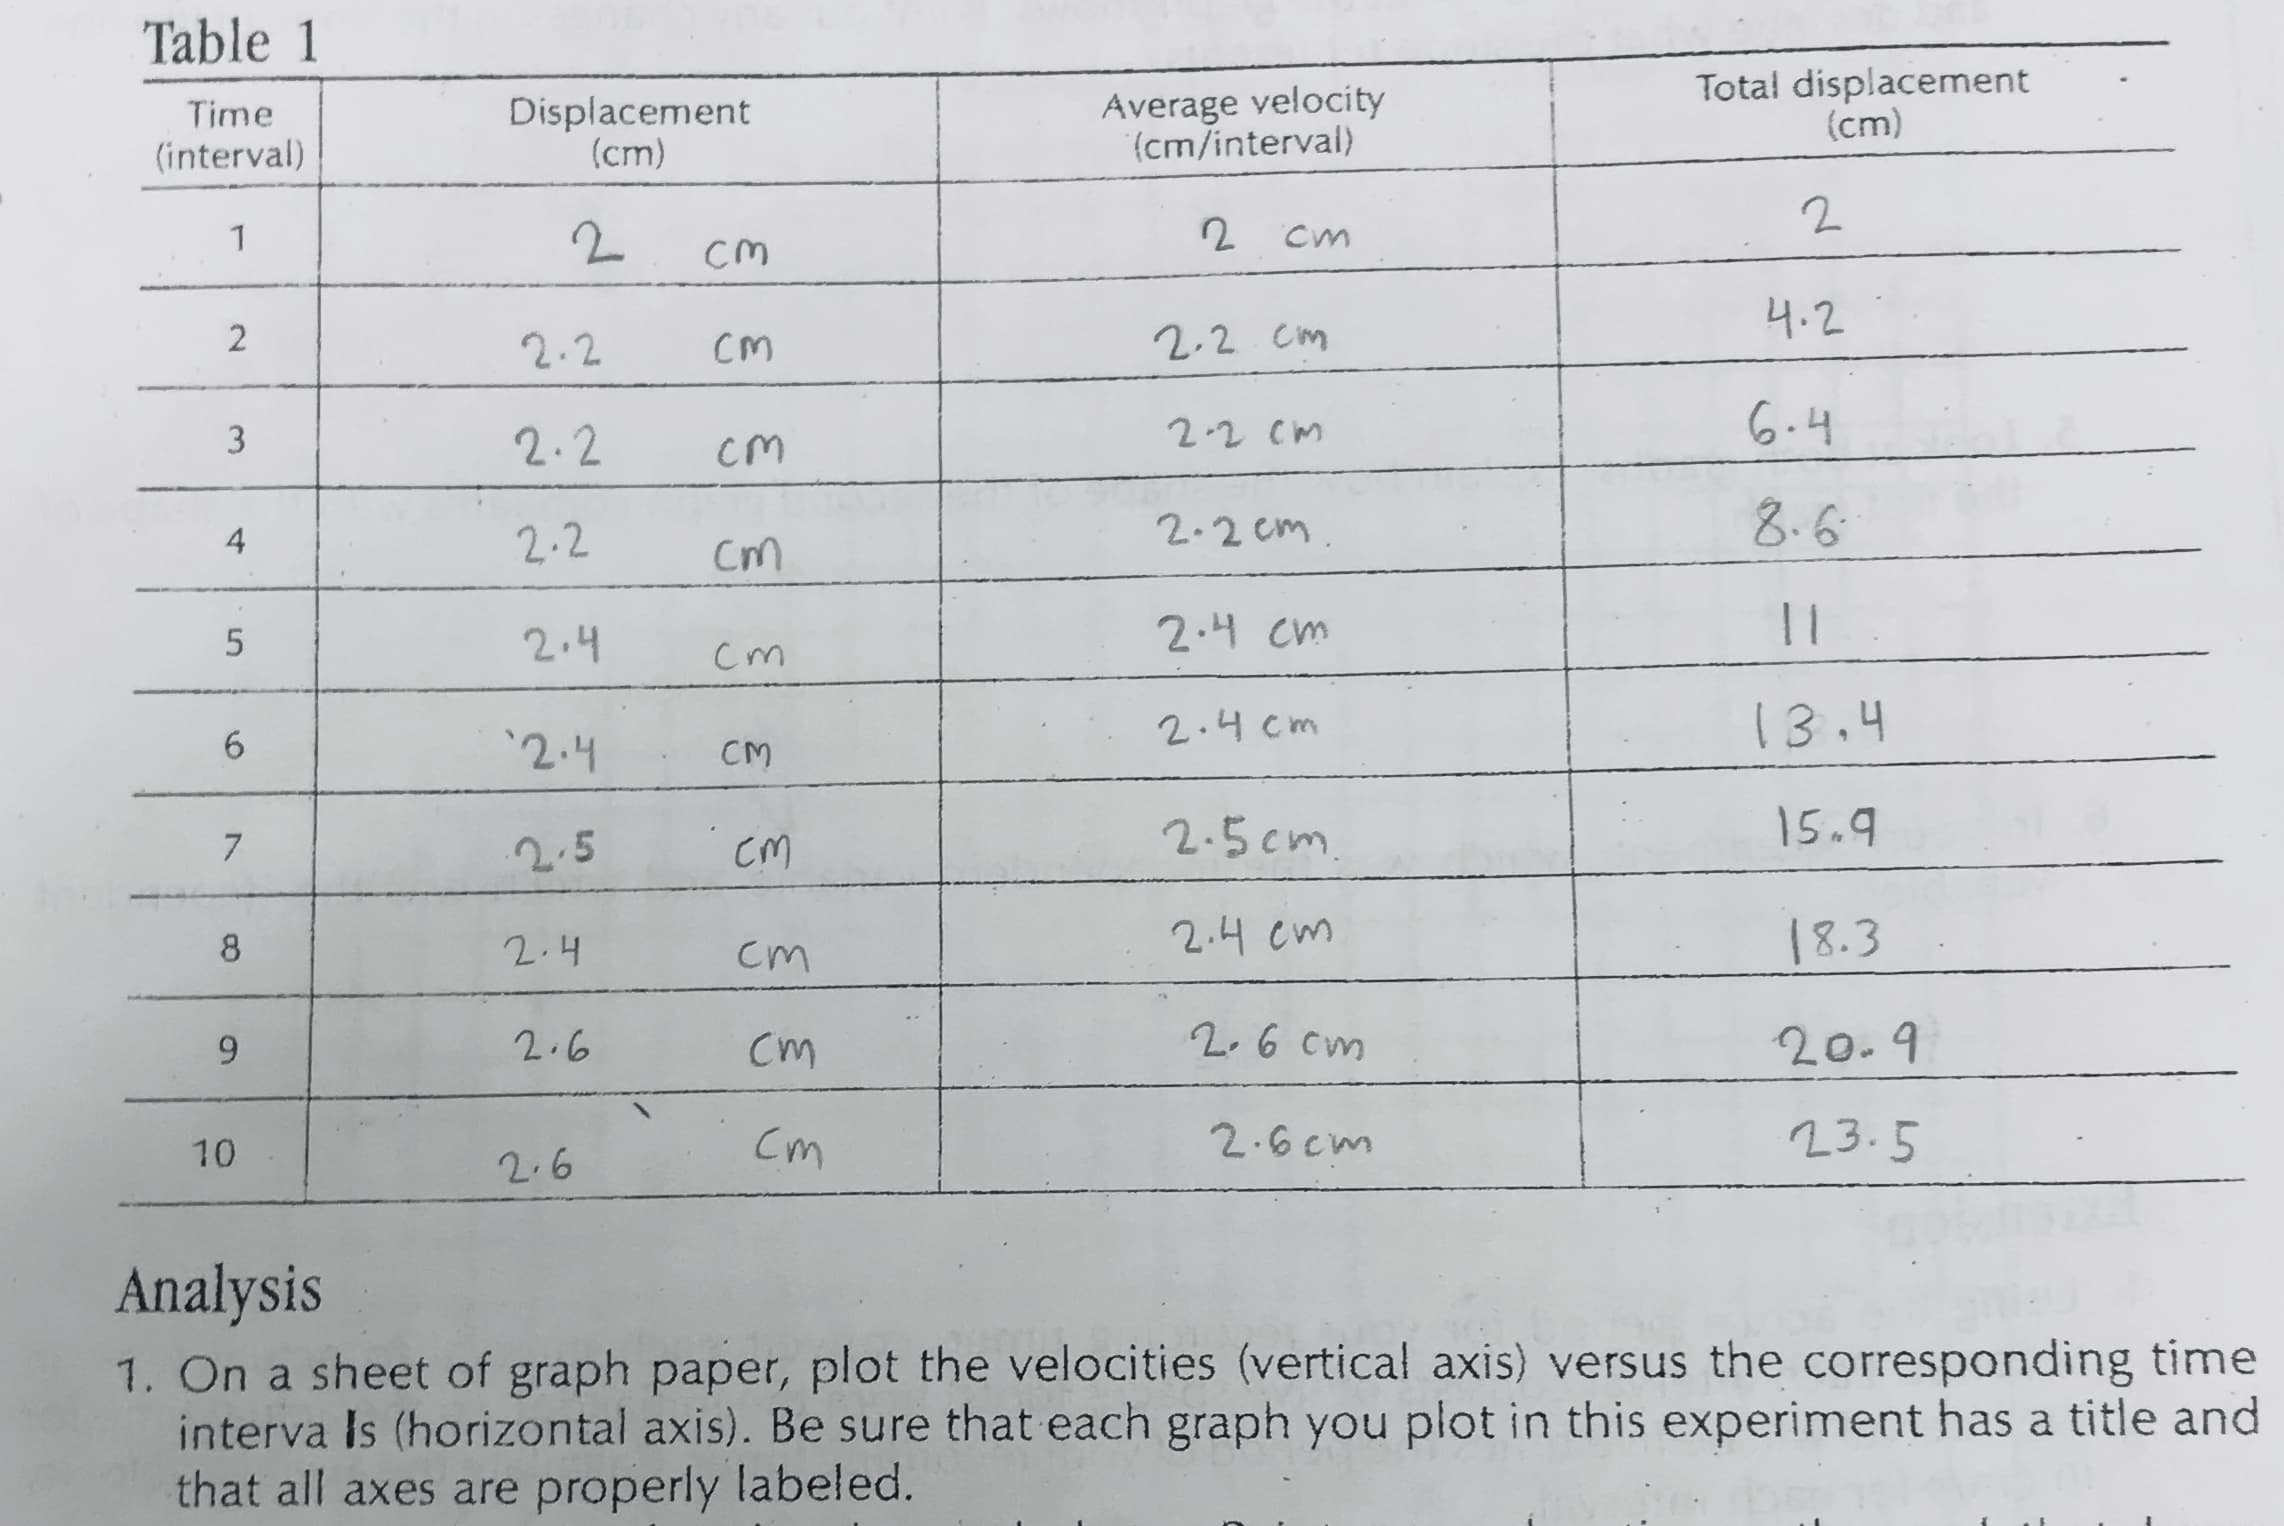 Table 1
Total displacement
(cm)
Average velocity
(cm/interval)
Displacement
(cm)
Time
(interval)
2
1
Cm
CM
4.2
2
2.2 Cm
2.2
CM
2-2 CM
2.2
cM
2.6
2-2 Cm
2-2
4
CnM
Tl
2.4 Cm
2.4
5
Cm
(3.4
2.4 cm
2.4
CM
15.9
2.5cm
7
CM
2.5
2.4 cm
8.3
8
2.4
Cm
2.6 Cm
20-4
2.6
Cm
9
23-5
2.6cm
Cm
10
2.6
Analysis
1. On a sheet of graph paper, plot the velocities (vertical axis) versus the corresponding time
interva Is (horizontal axis). Be sure that each graph you plot in this experiment has a title and
that all axes are properly labeled.
